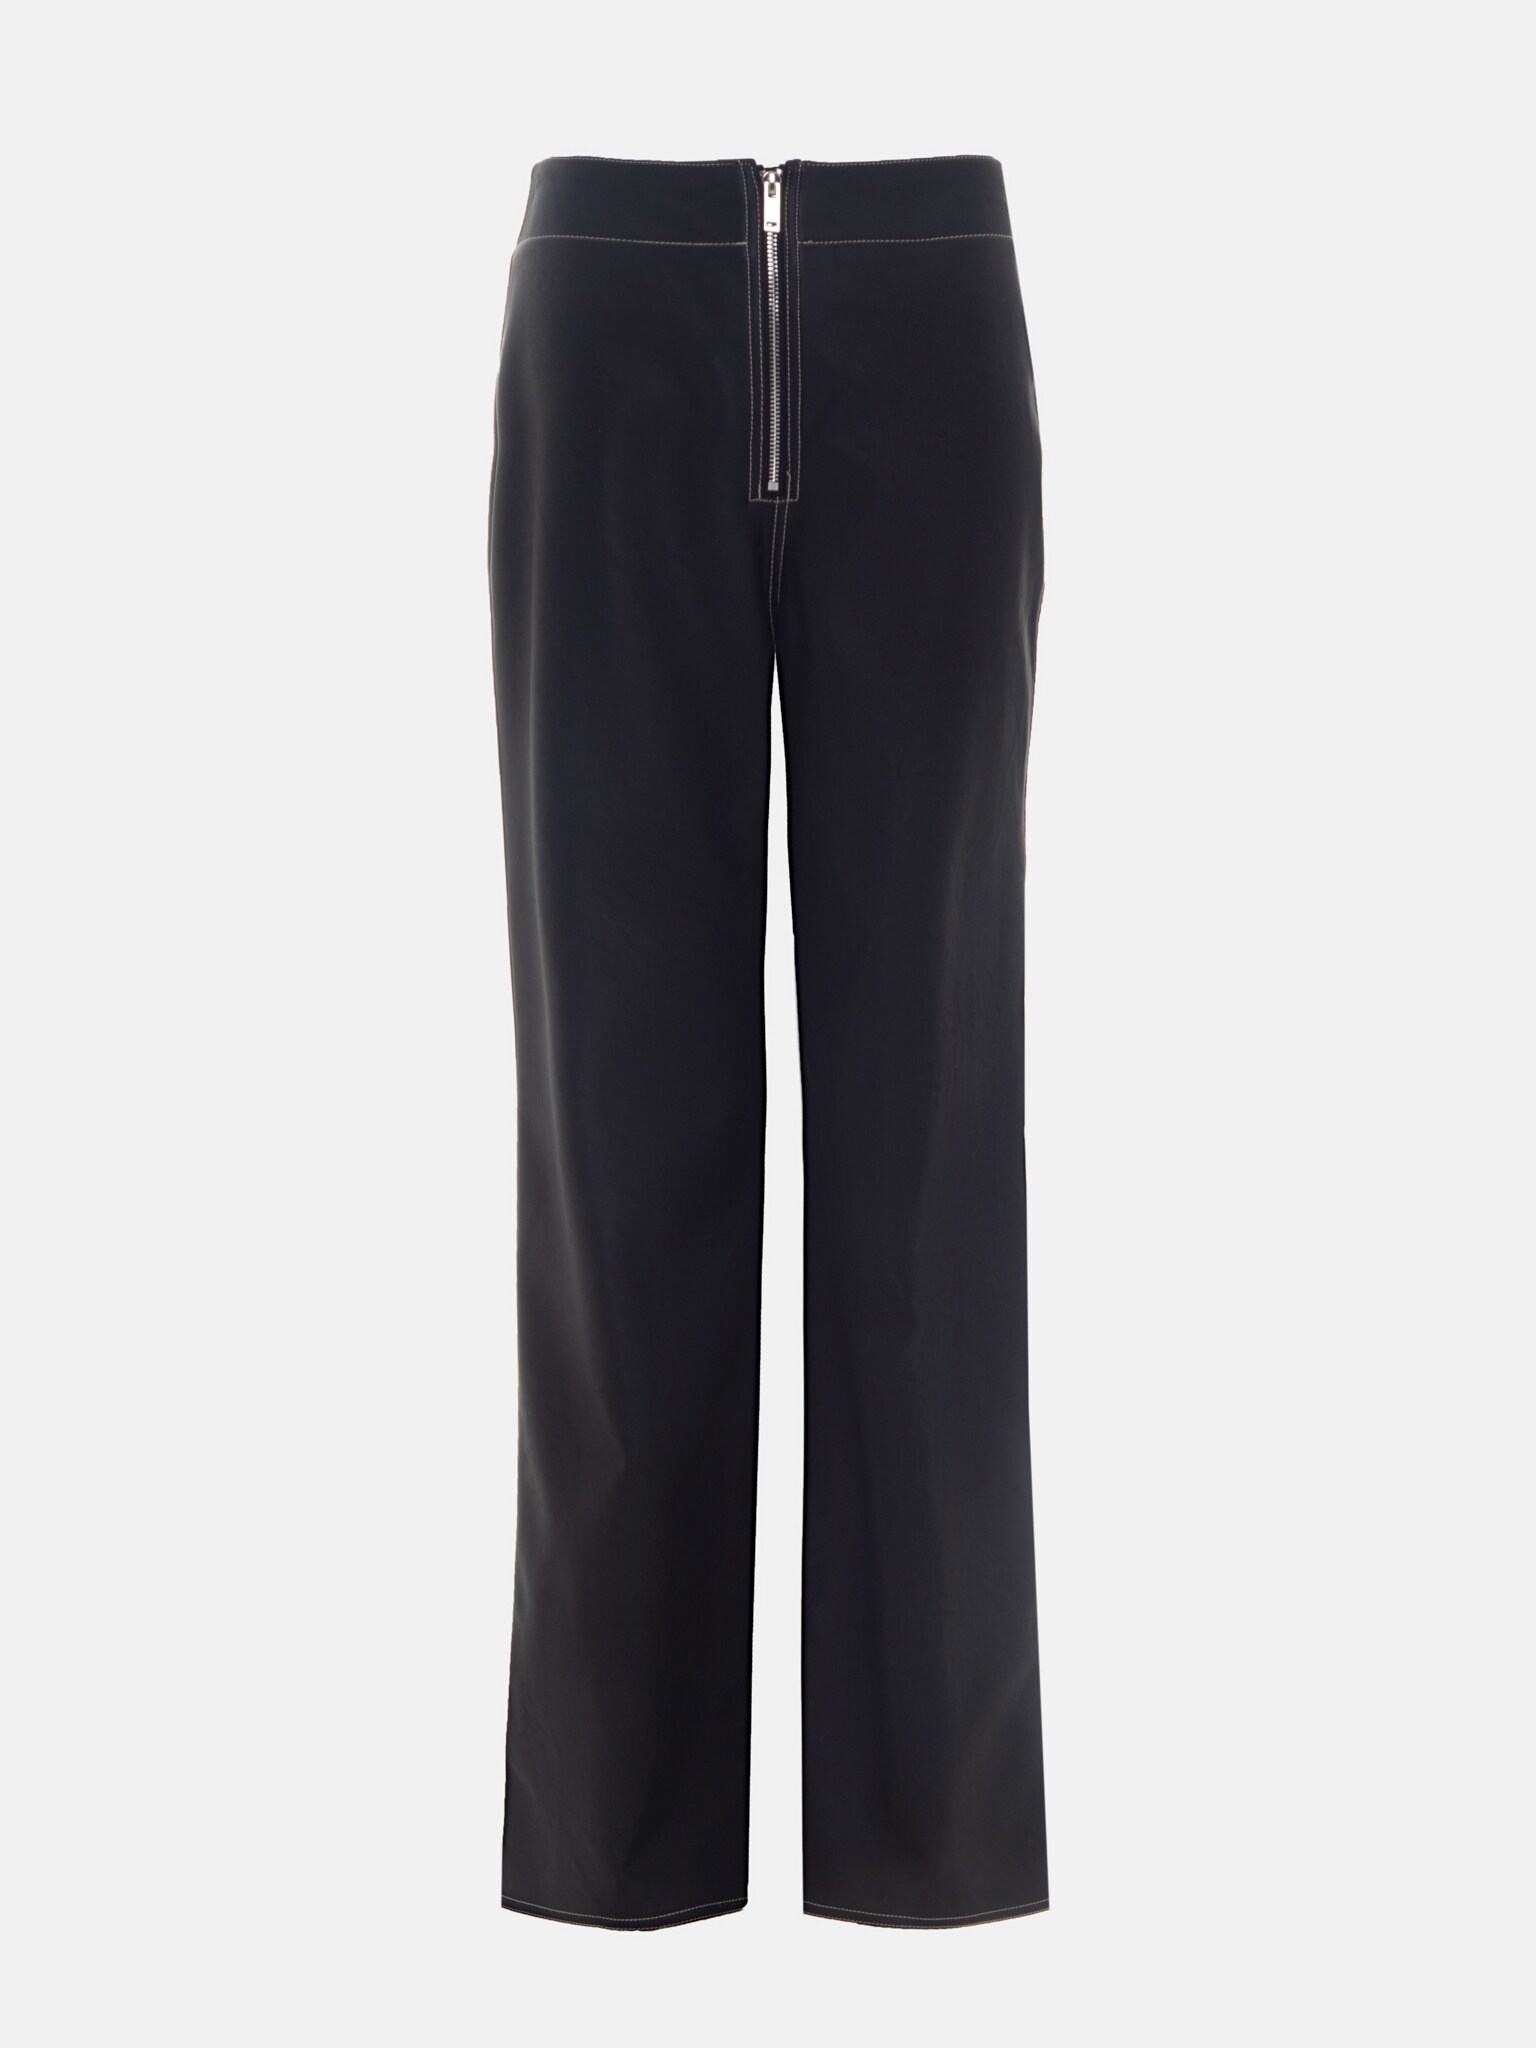 Loose sweatpants with a front zip :: LICHI - Online fashion store